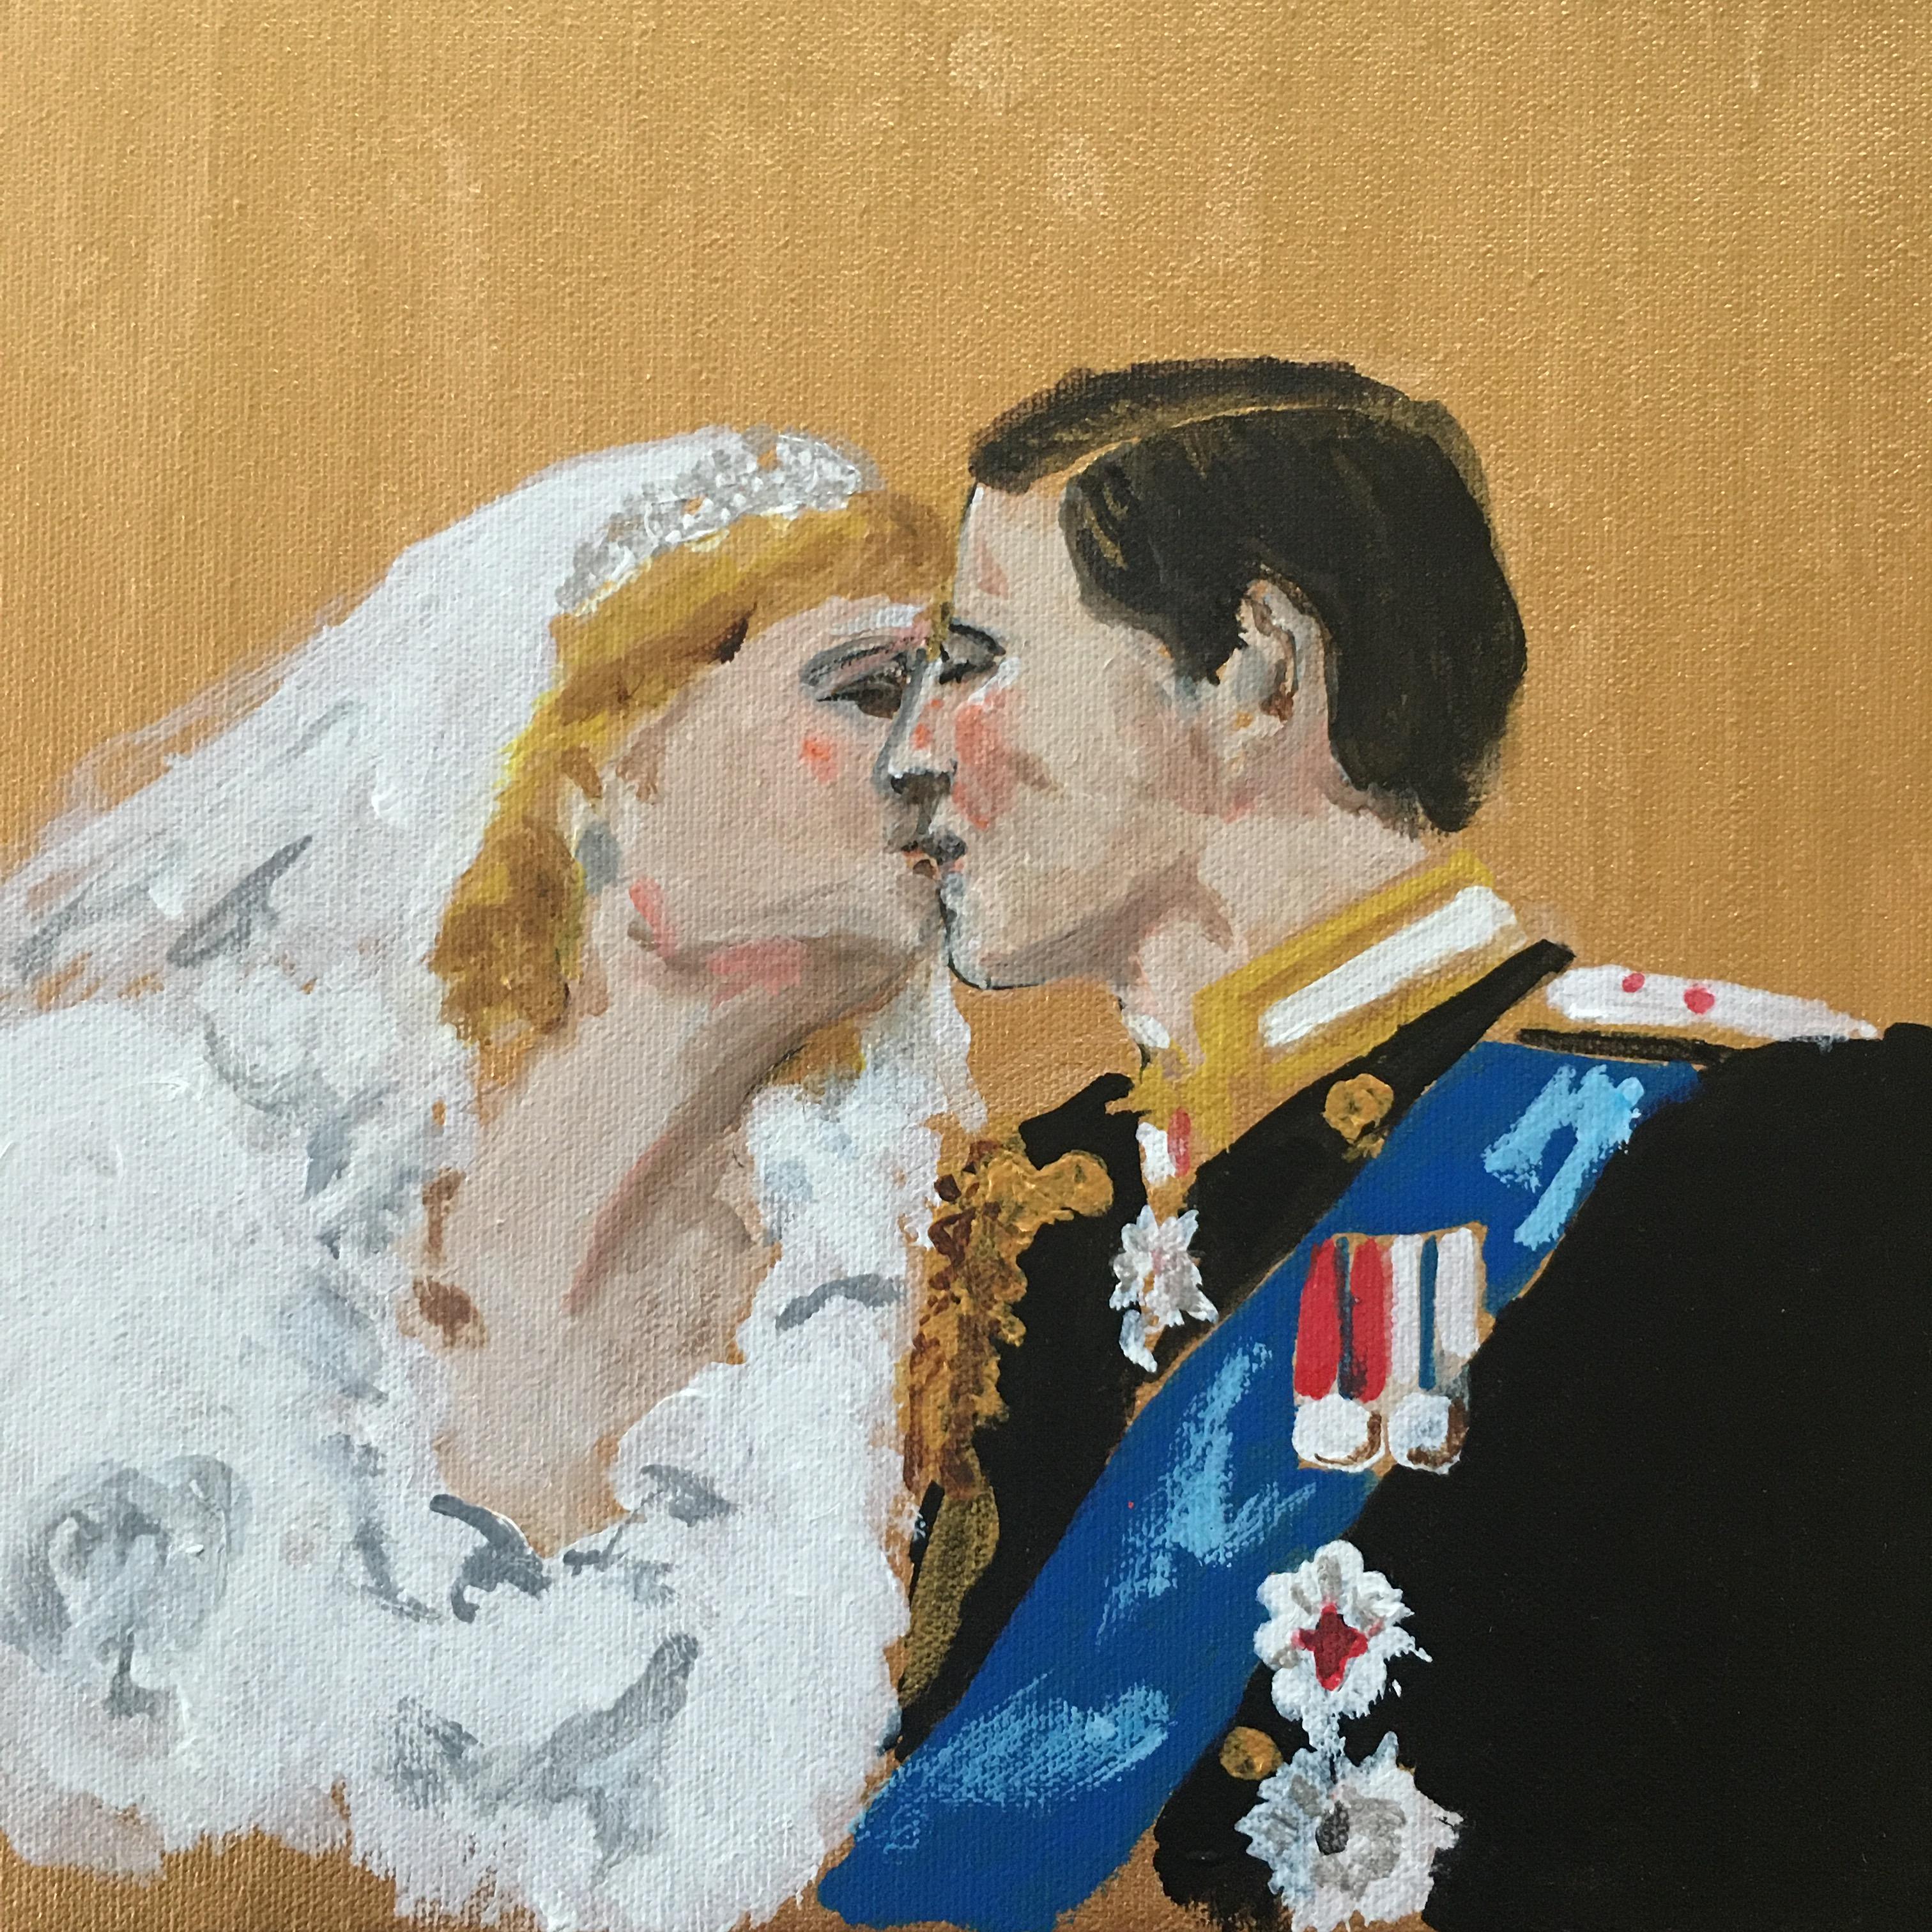 Manuel Santelices Portrait Painting - The Kiss, Princes Diana and Principe Charles weading kiss. Acrylic on Canvas.